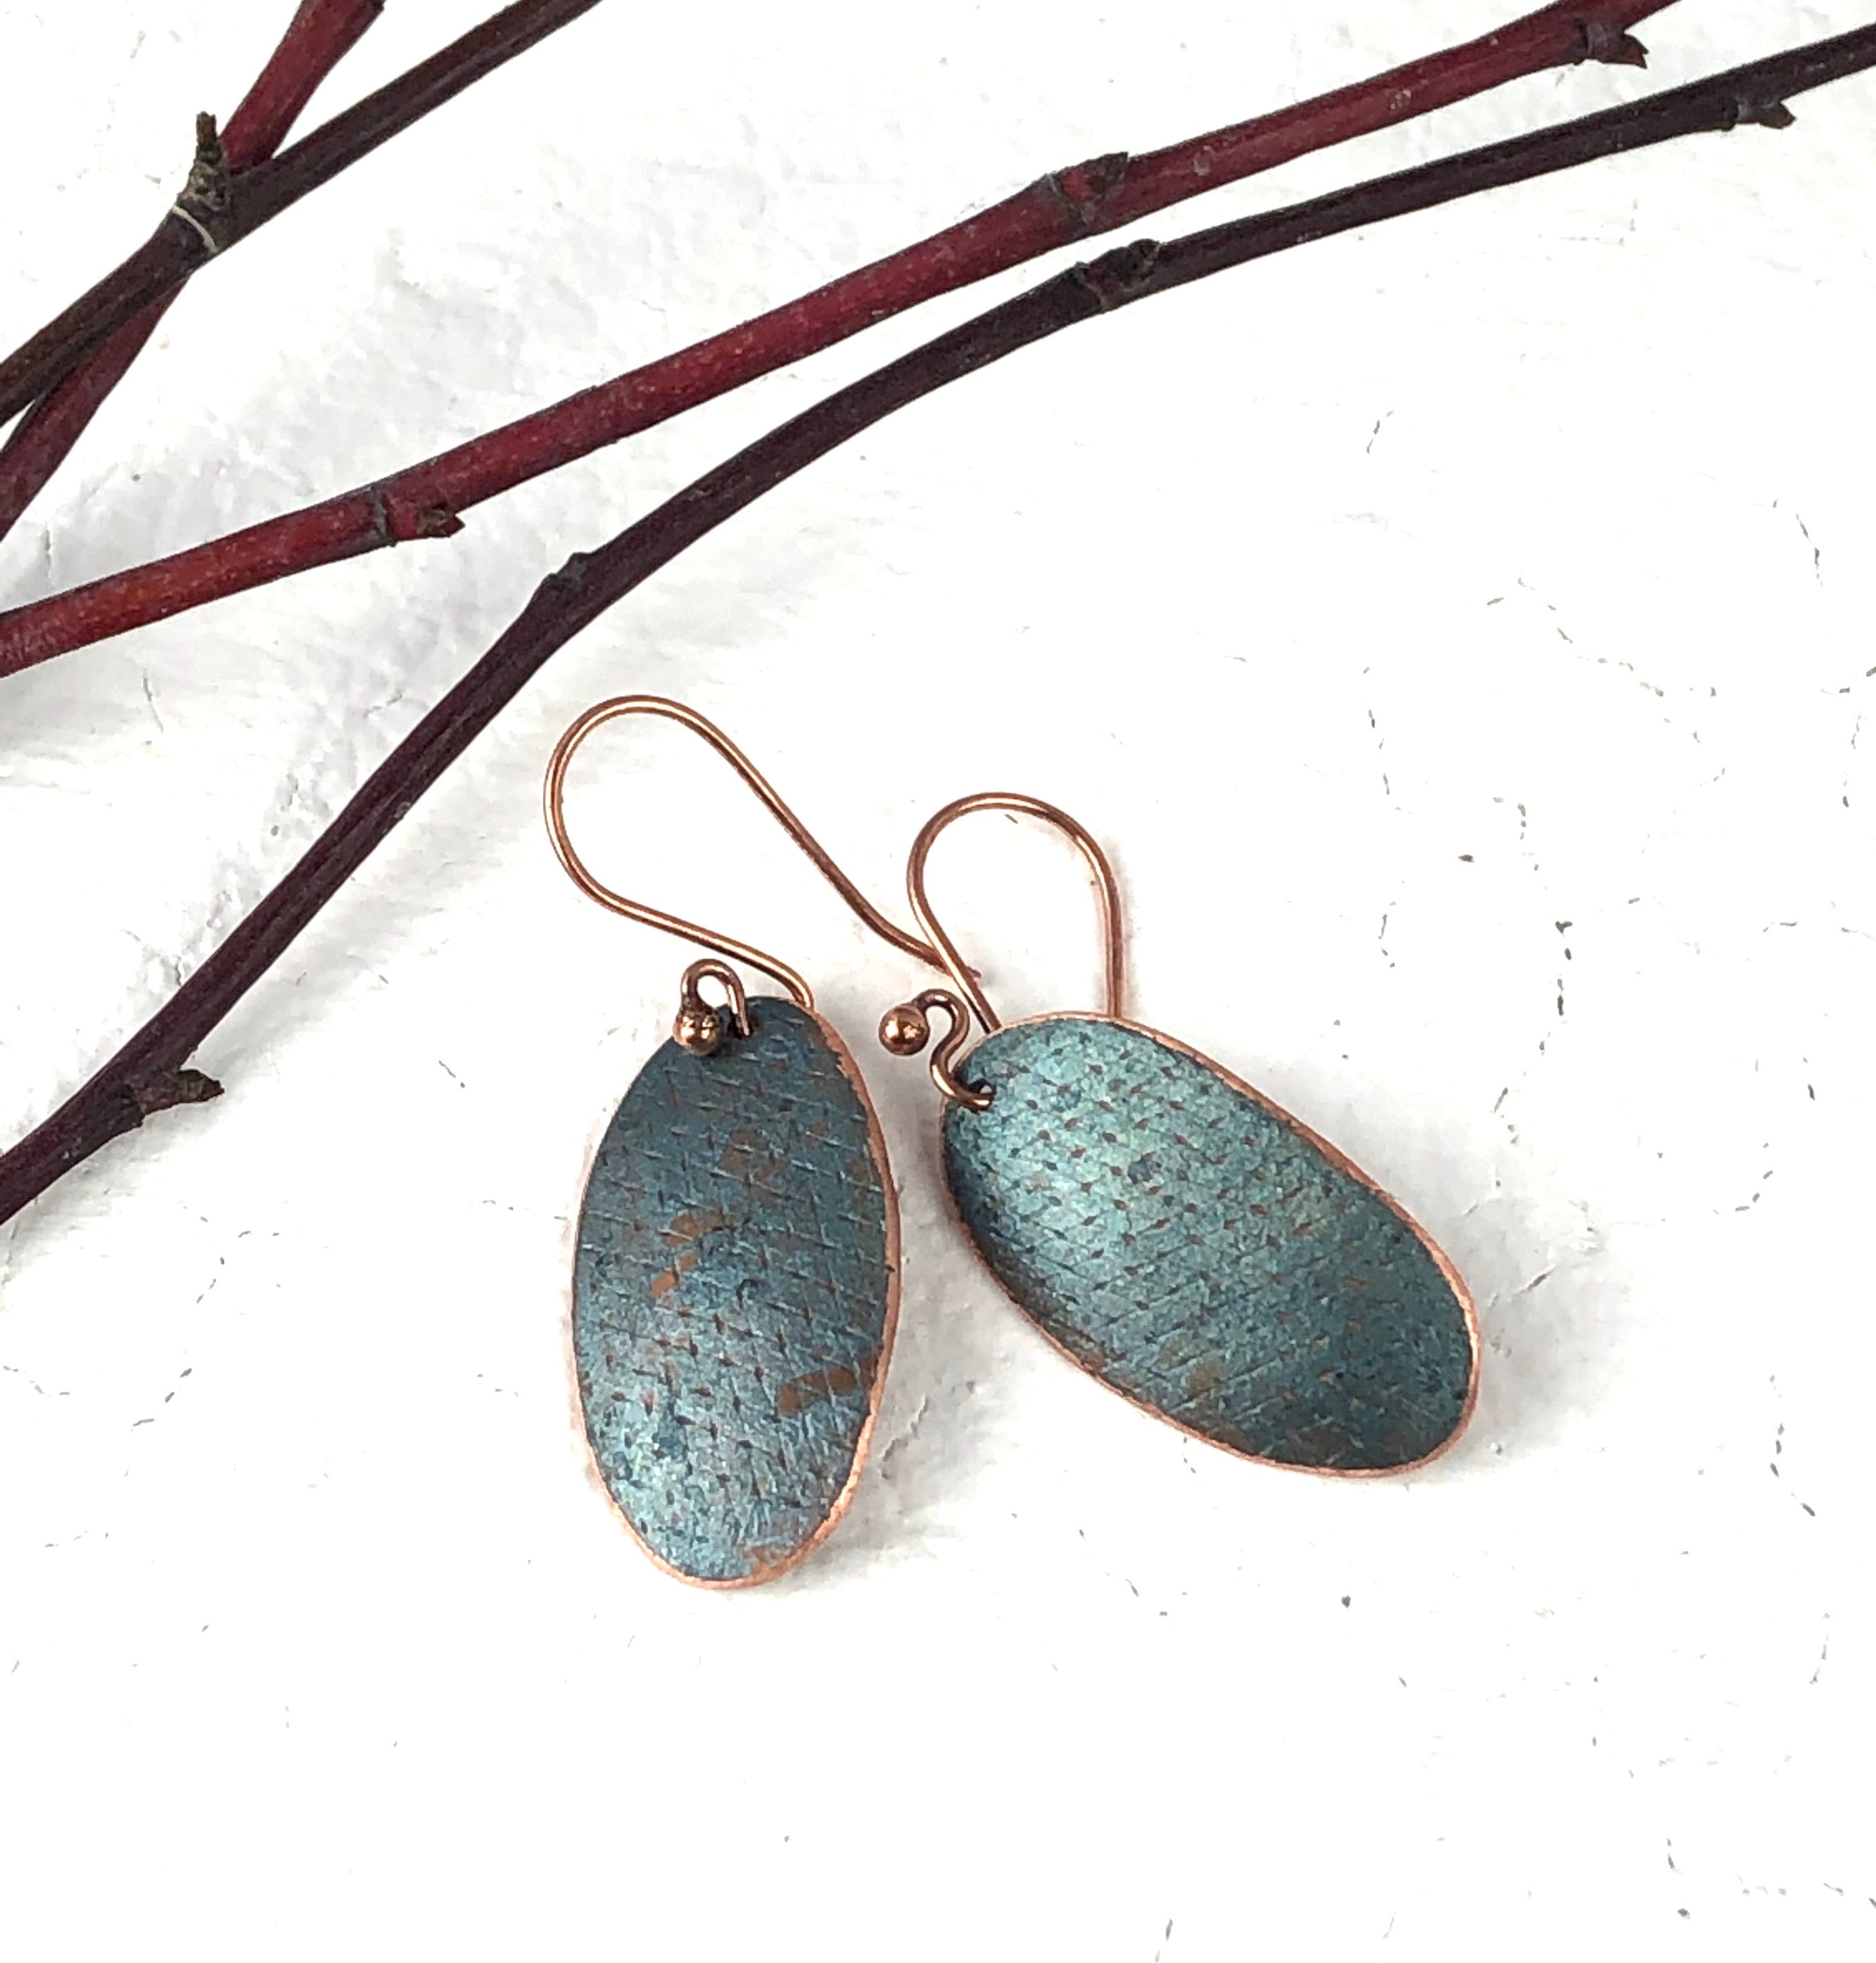 Blue Recycled Handmade Hammered women's Copper Earring Jewelry